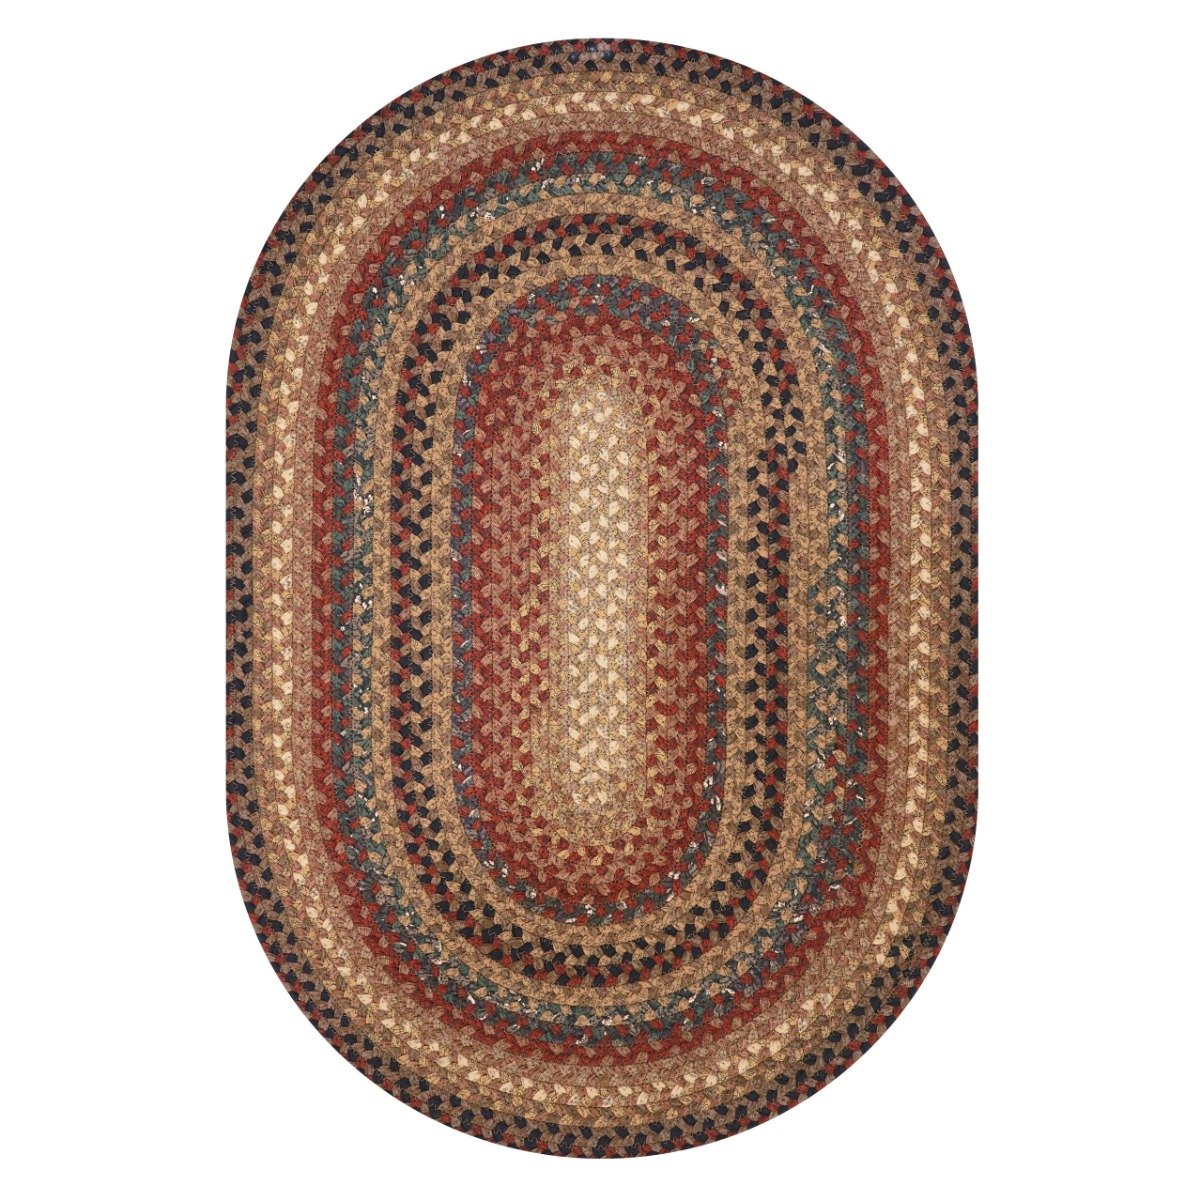 Cocoa Bean Black - Grey Cotton Braided Oval Rugs